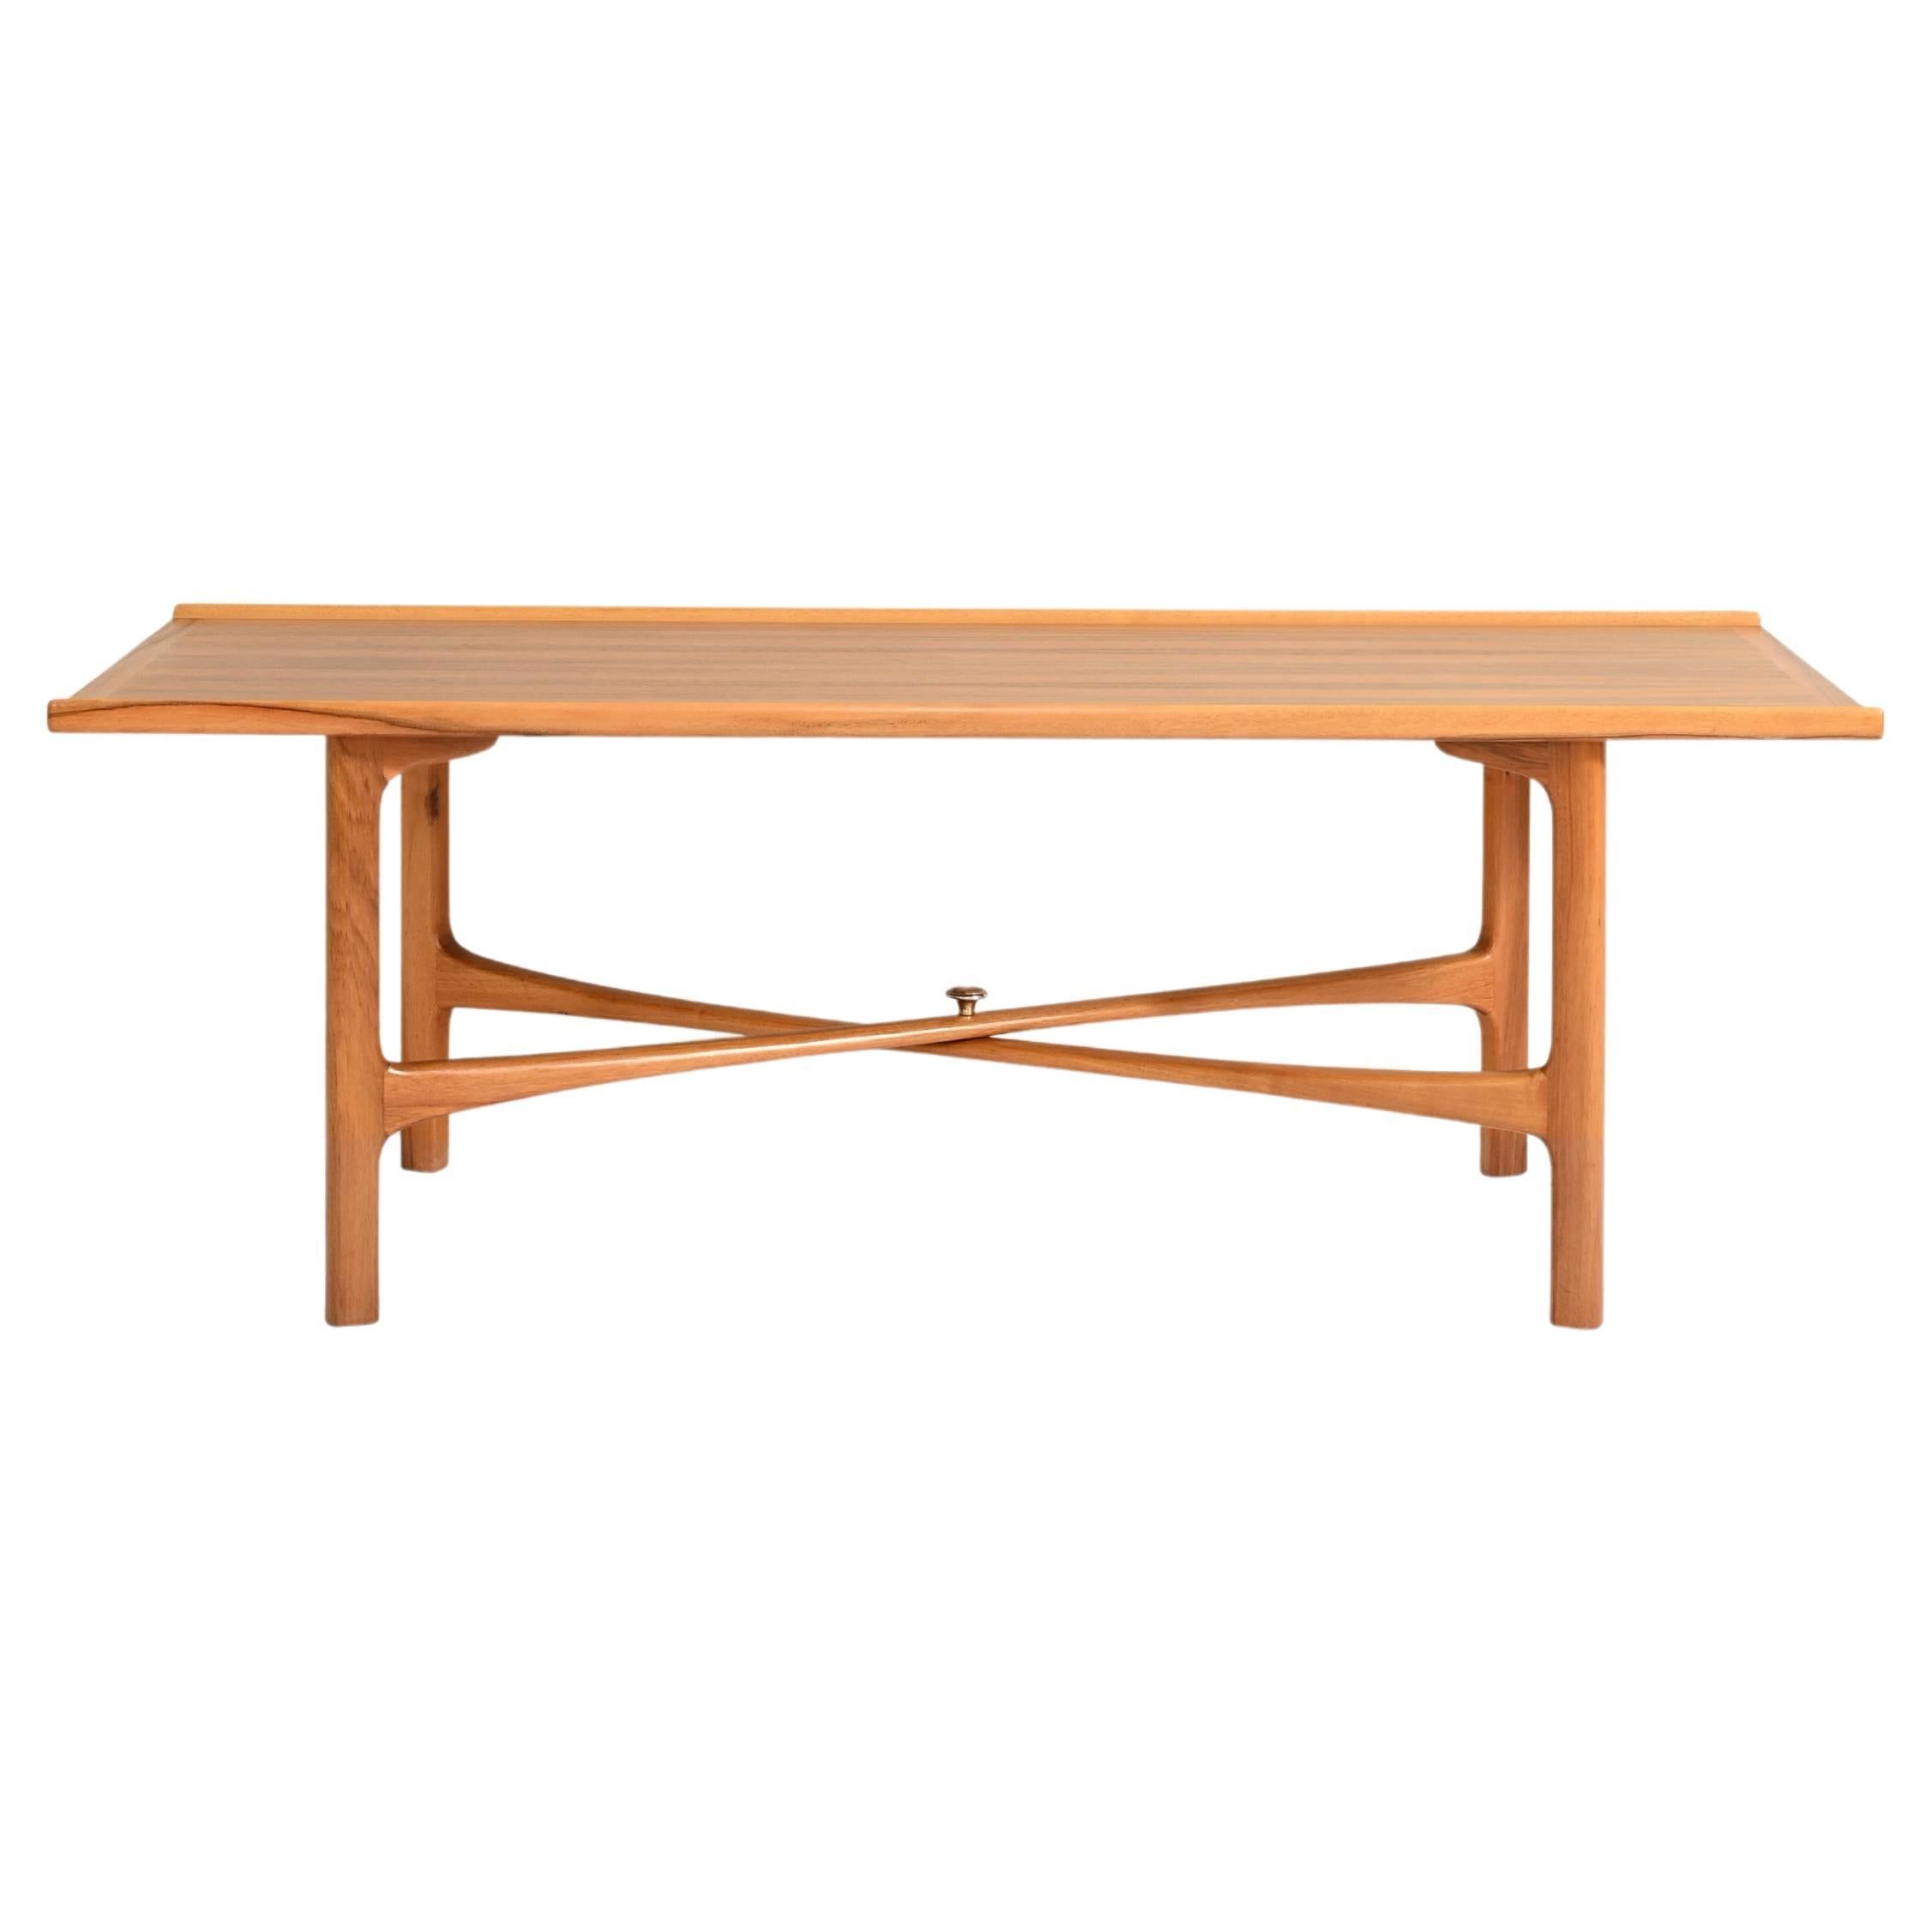 Teak Coffee Tablefolke Ohlsson For Bodafors For Sale At 1stdibs In Caramalized Coffee Tables (View 15 of 20)